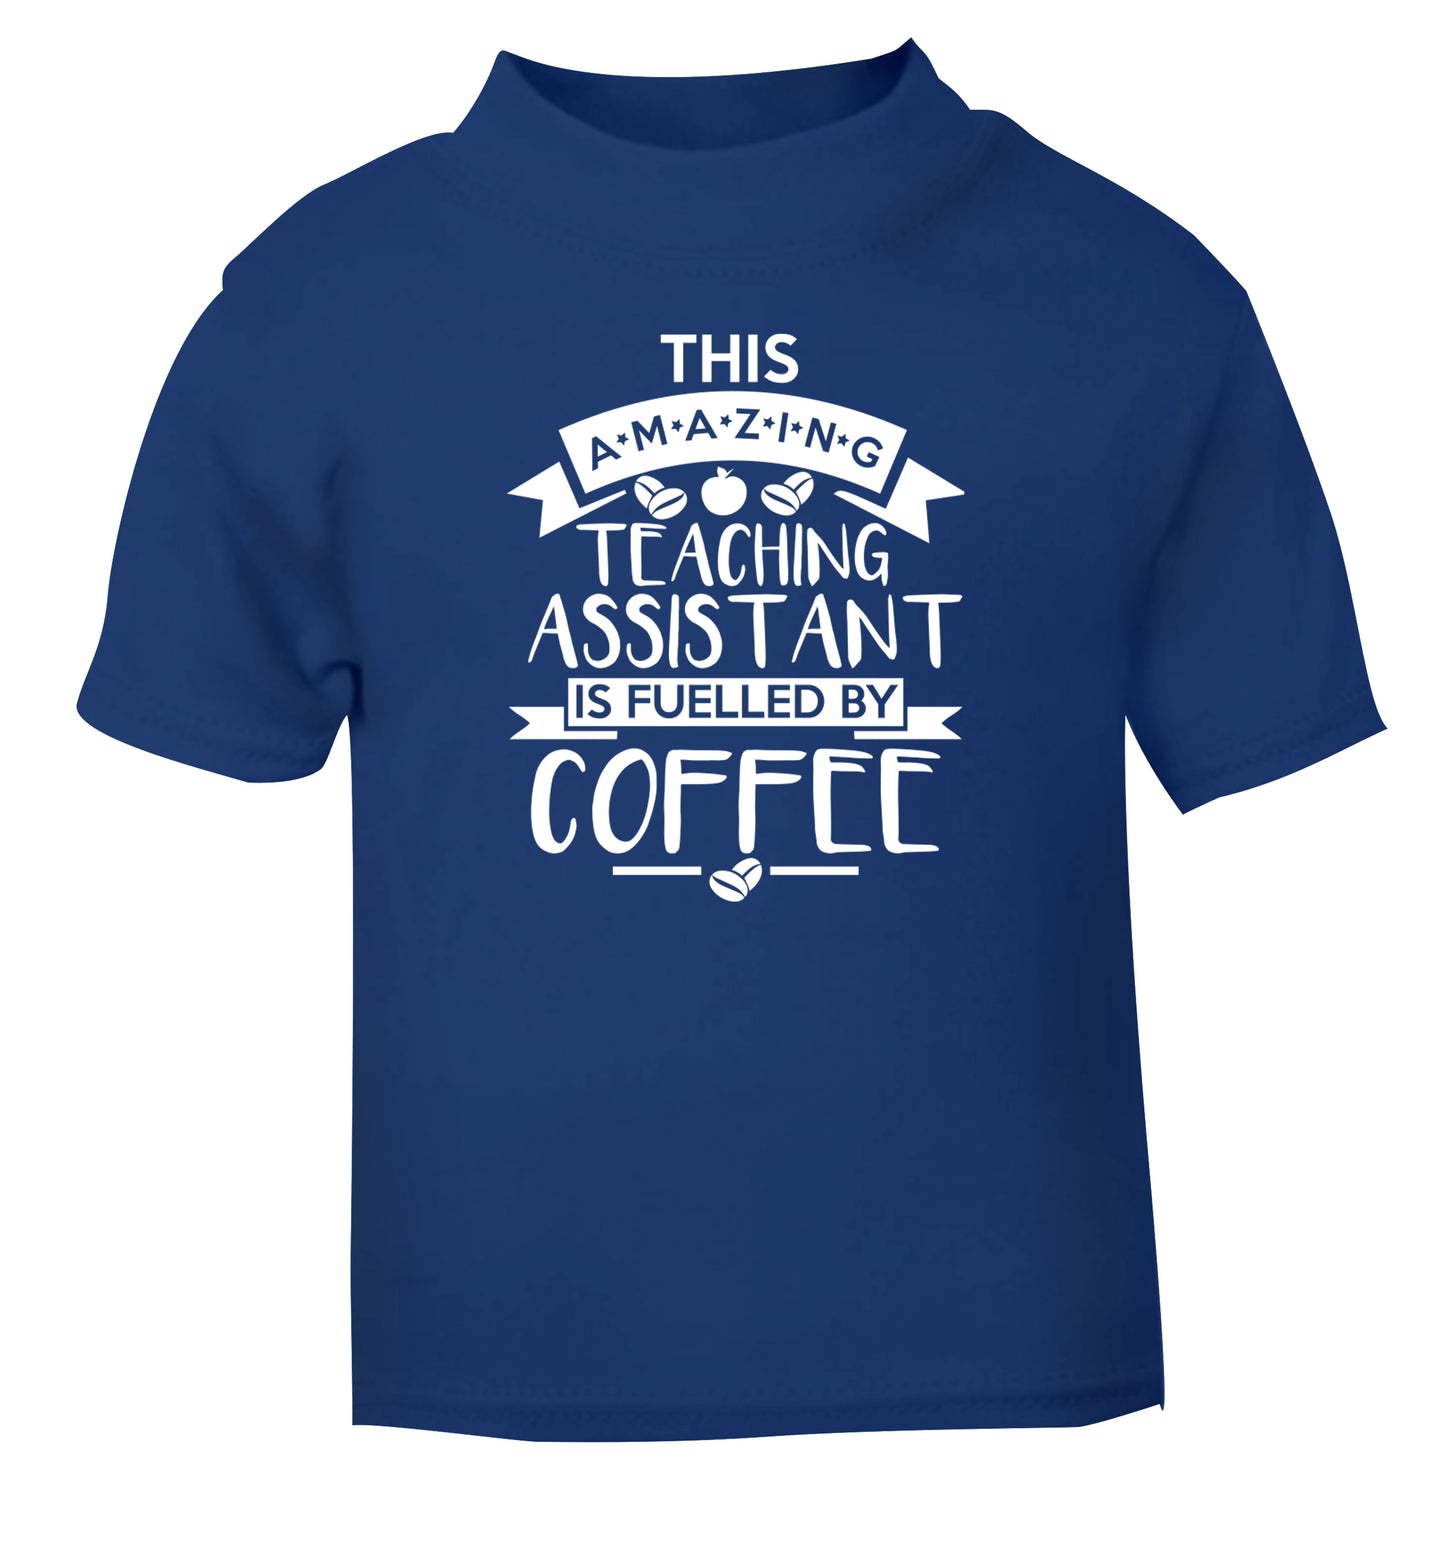 This amazing teaching assistant is fuelled by coffee blue Baby Toddler Tshirt 2 Years